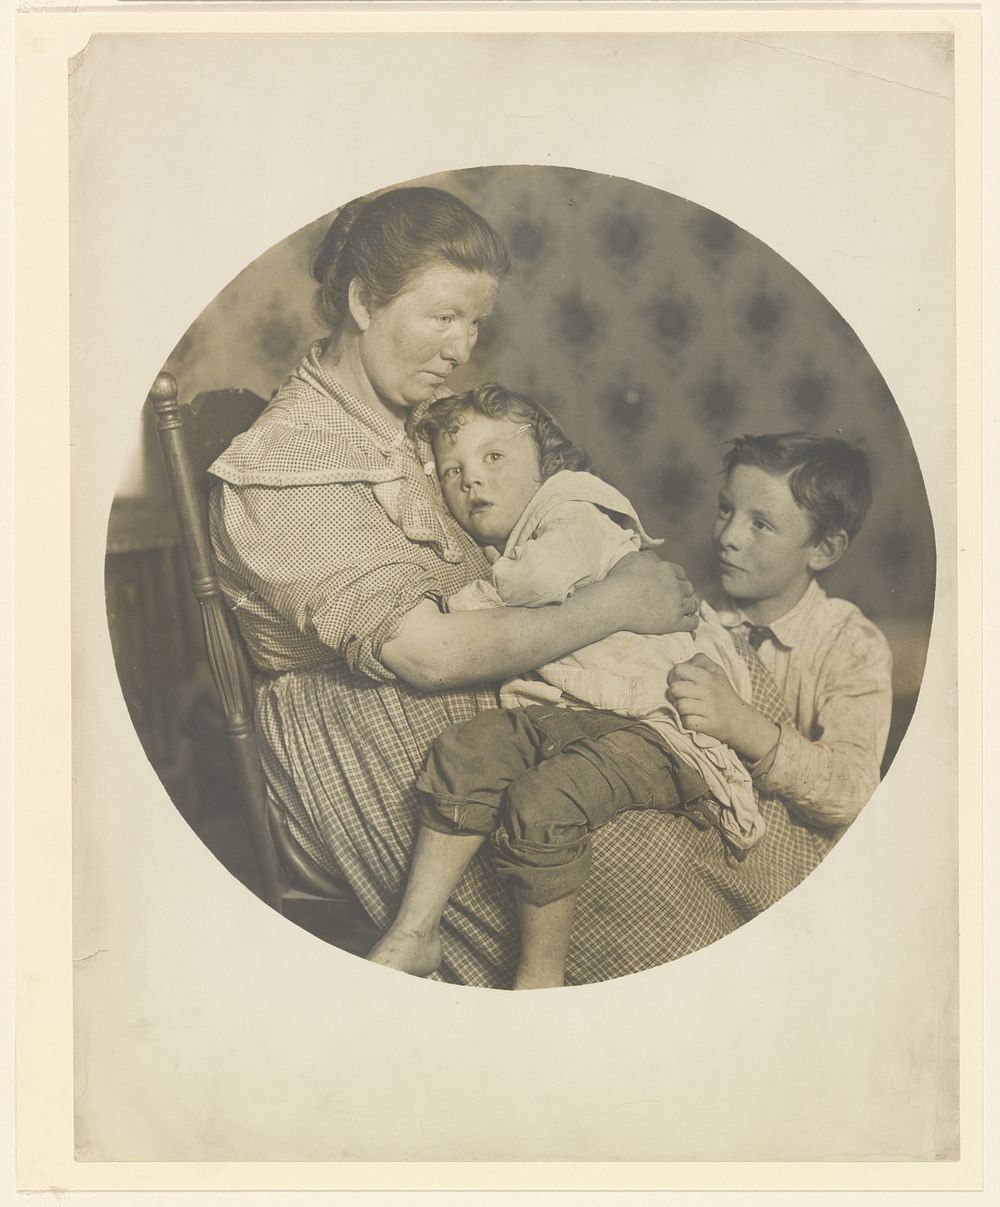 Tenement House Madonna by Lewis W Hine